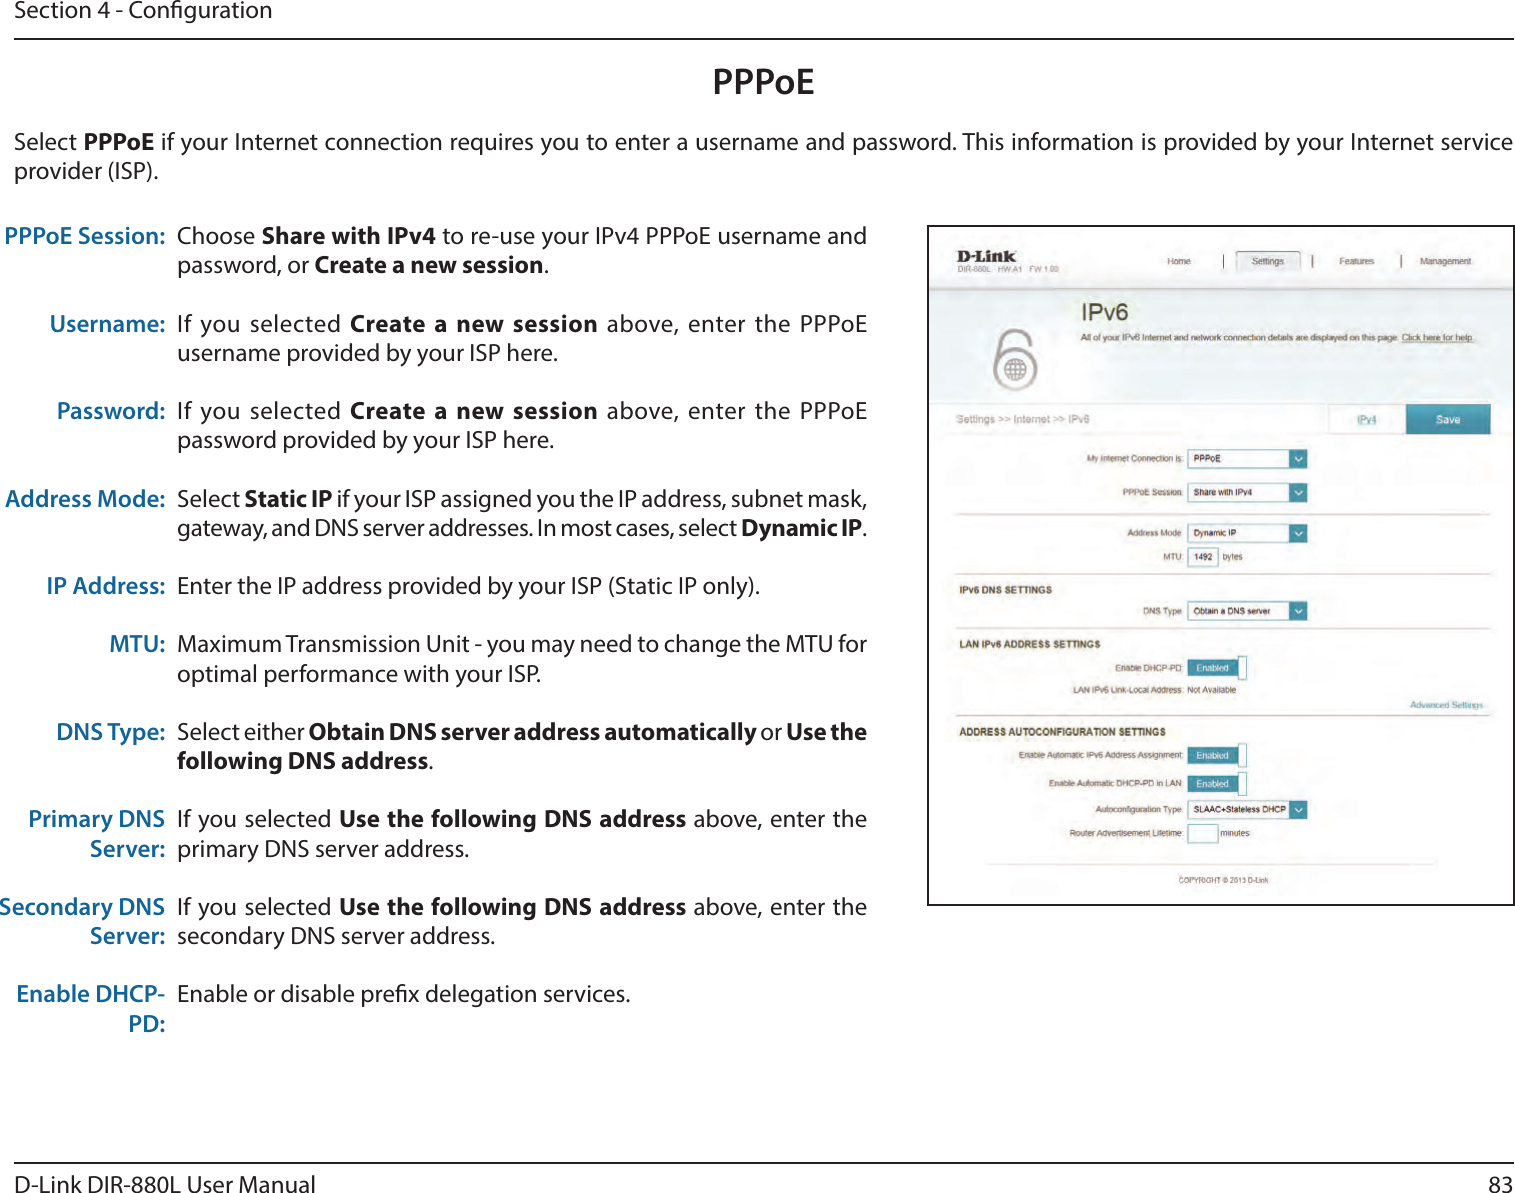 83D-Link DIR-880L User ManualSection 4 - CongurationPPPoEChoose Share with IPv4 to re-use your IPv4 PPPoE username and password, or Create a new session.If  you  selected  Create  a  new  session  above,  enter the PPPoE username provided by your ISP here.If  you  selected  Create  a  new  session  above,  enter the PPPoE password provided by your ISP here.Select Static IP if your ISP assigned you the IP address, subnet mask, gateway, and DNS server addresses. In most cases, select Dynamic IP.Enter the IP address provided by your ISP (Static IP only).Maximum Transmission Unit - you may need to change the MTU for optimal performance with your ISP.Select either Obtain DNS server address automatically or Use the following DNS address.If you selected Use the following DNS address above, enter the primary DNS server address. If you selected Use the following DNS address above, enter the secondary DNS server address.Enable or disable prex delegation services.PPPoE Session:Username:Password:Address Mode:IP Address:MTU:DNS Type:Primary DNS Server:Secondary DNS Server:Enable DHCP-PD:Select PPPoE if your Internet connection requires you to enter a username and password. This information is provided by your Internet service provider (ISP).